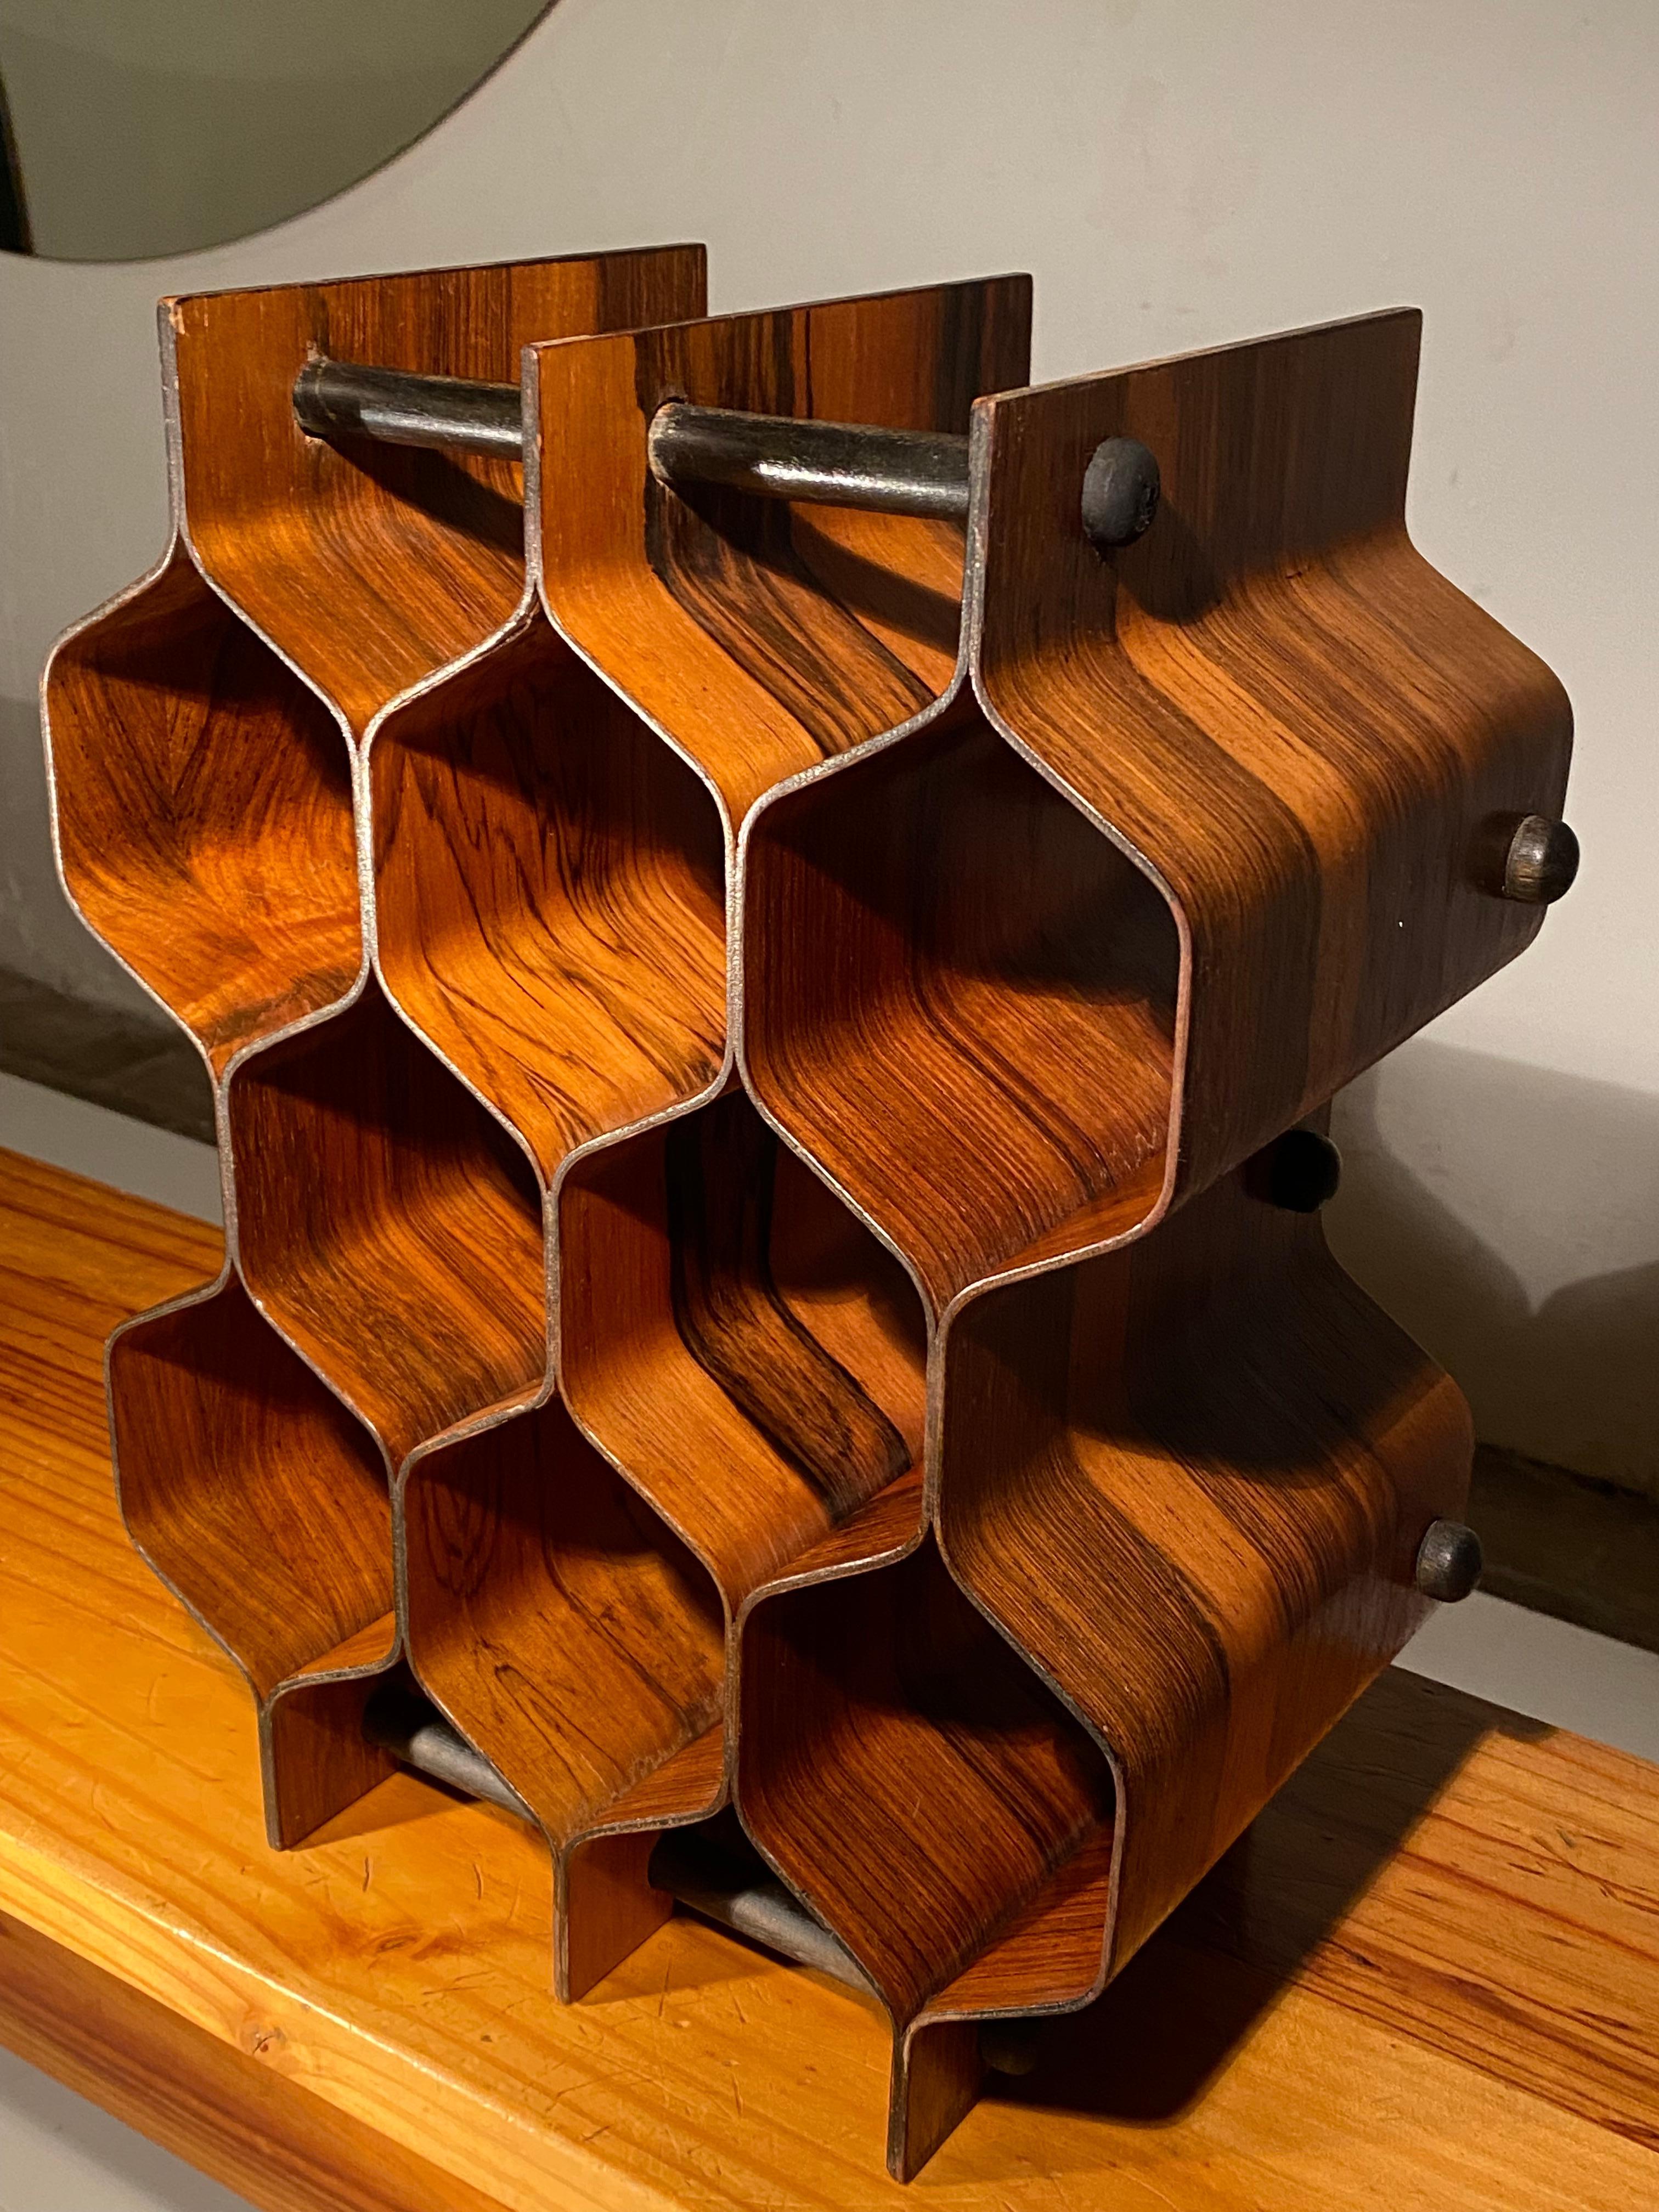 Honest original vintage example of a plywood Honey Comb wine rack by Scandinavian designer Torsten Johansson for AB Former Sweden made in the early 1960's

This wine rack is a multifunctional design classic as its perfect for not only storing but